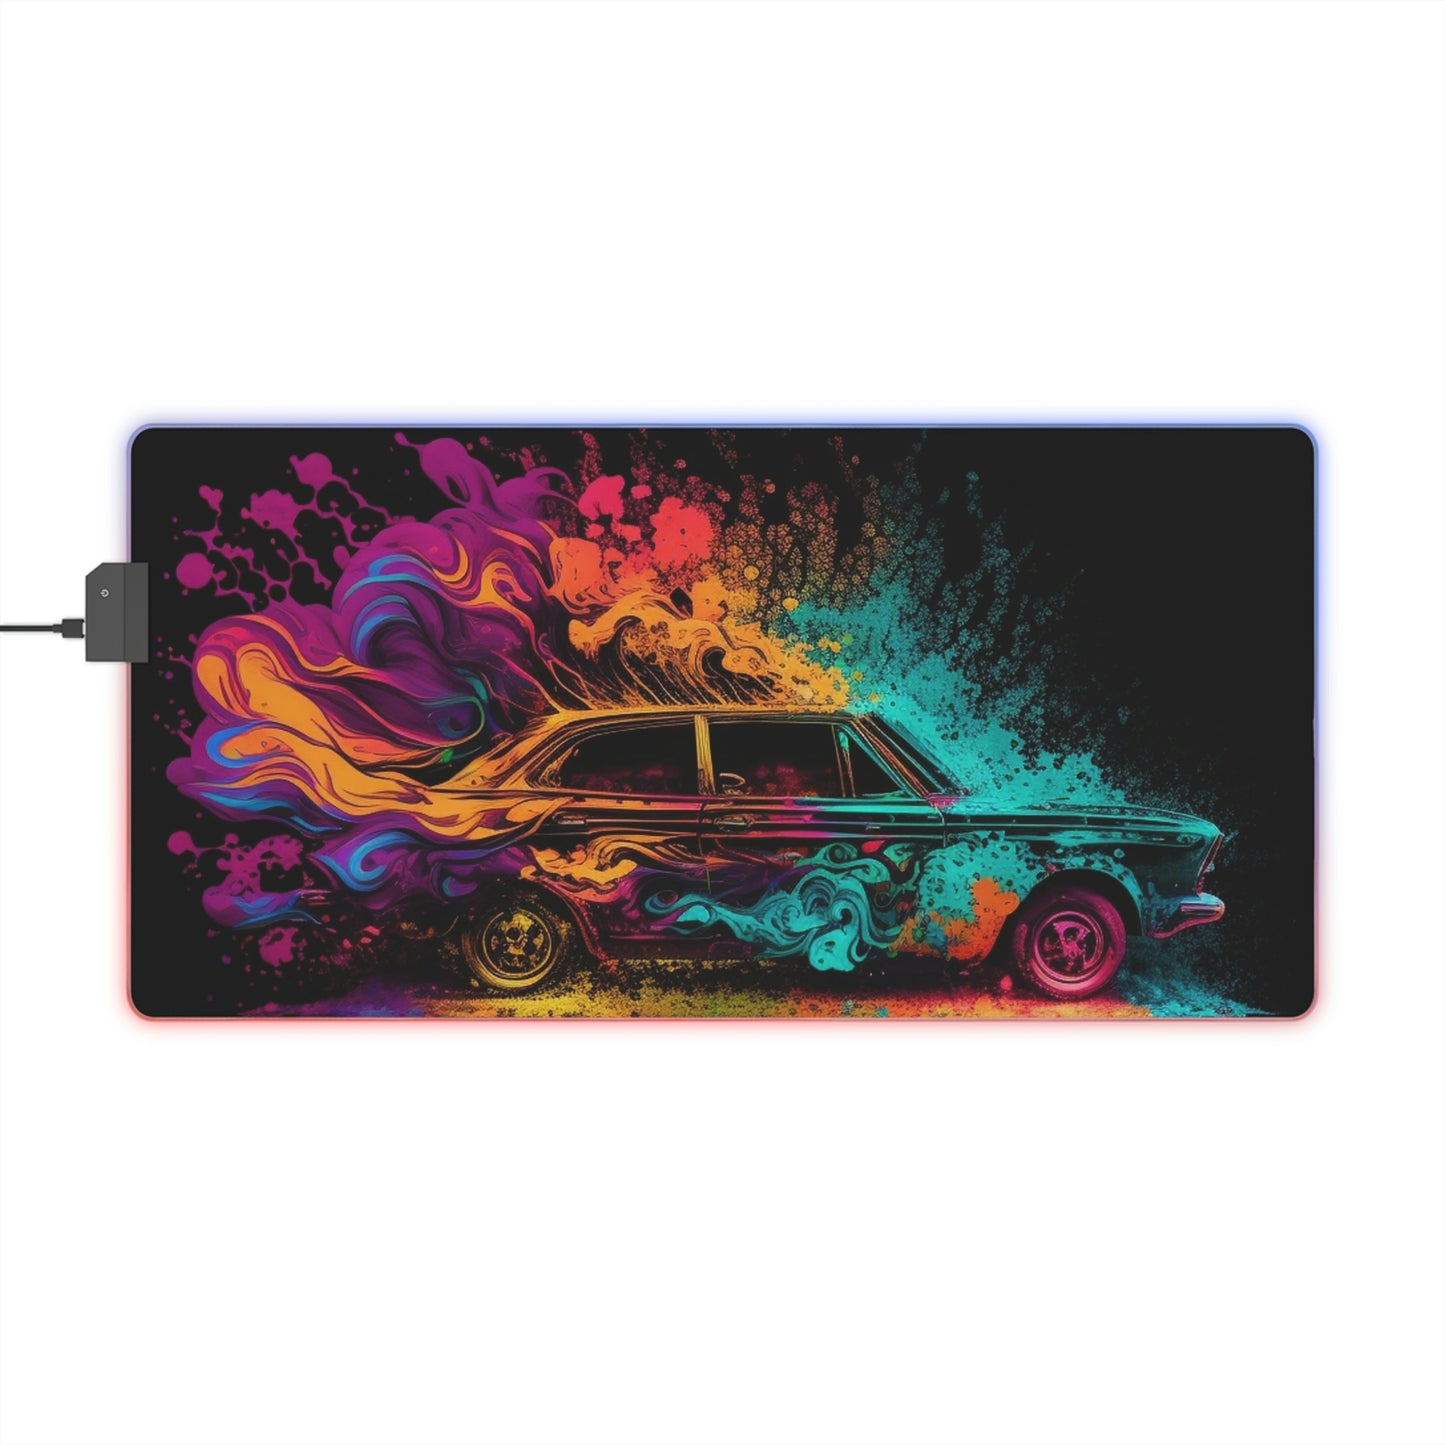 LED Gaming Mouse Pad Hotrod Color 3